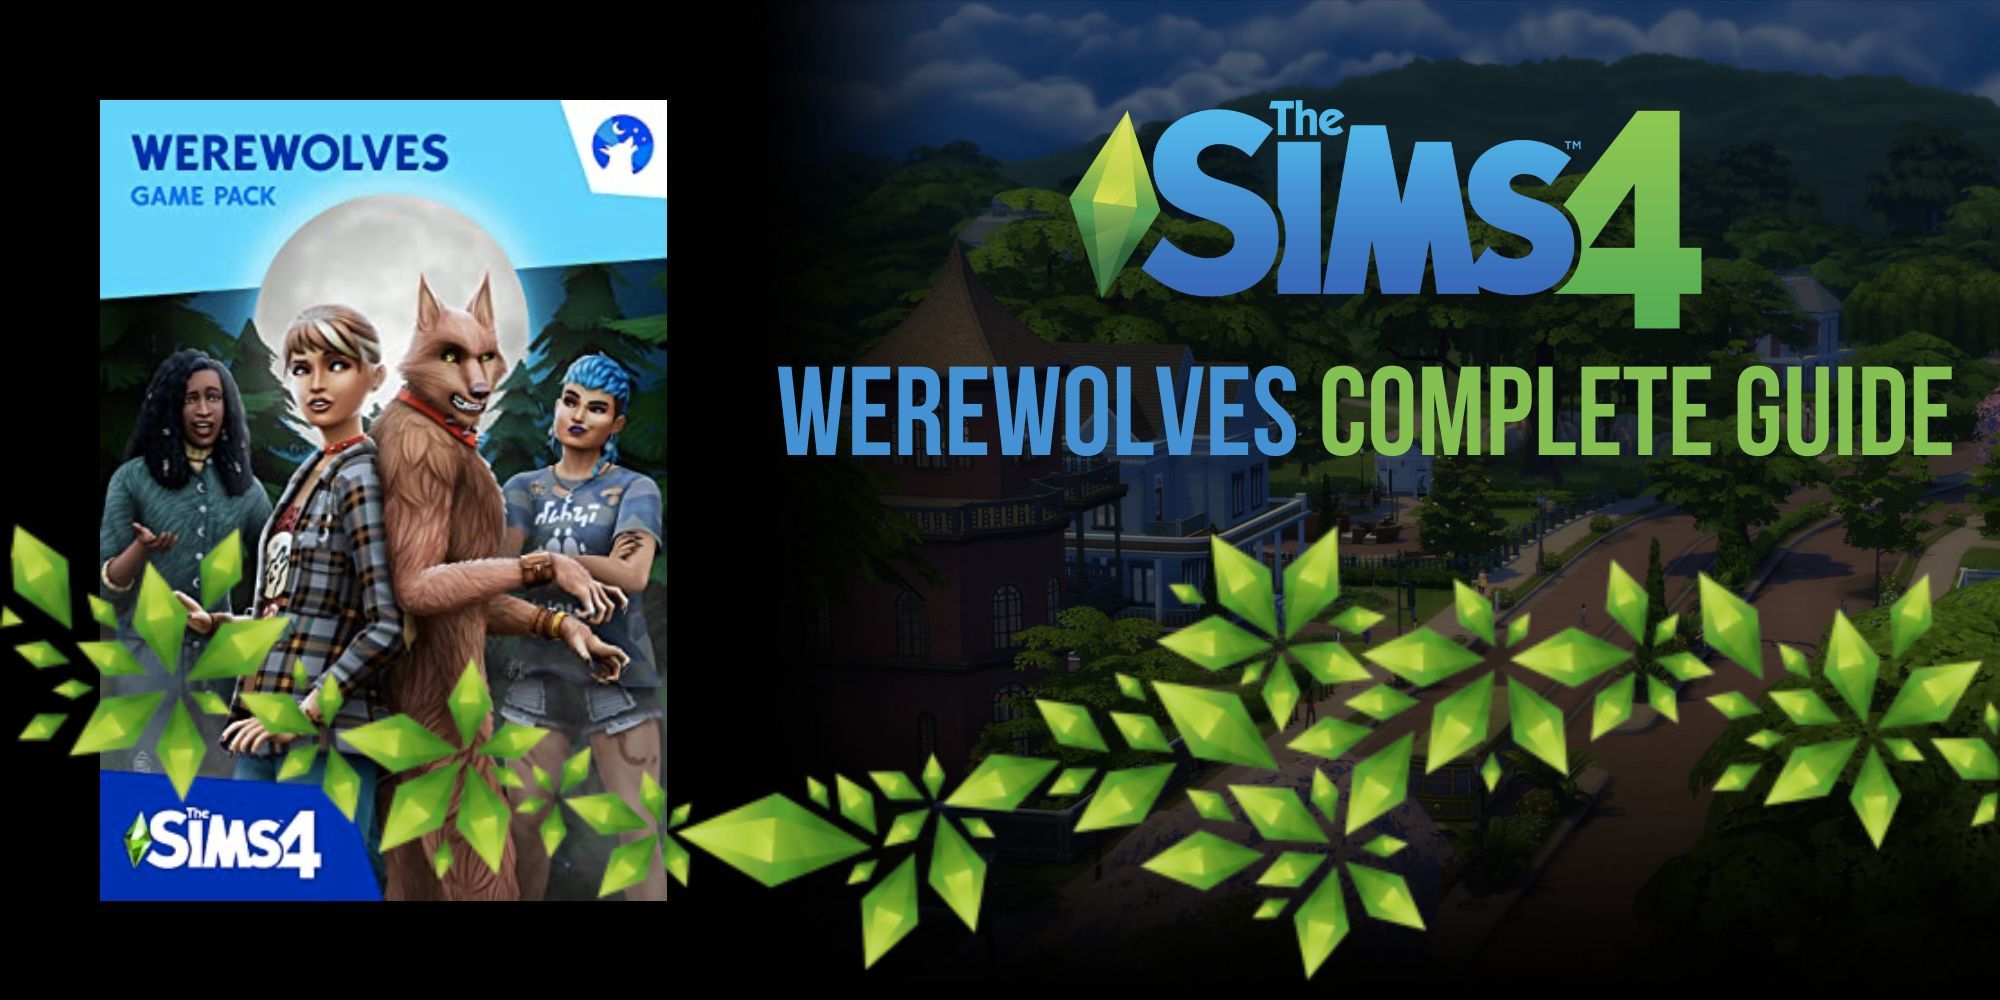 The Sims 4 Werewolves Complete Guide